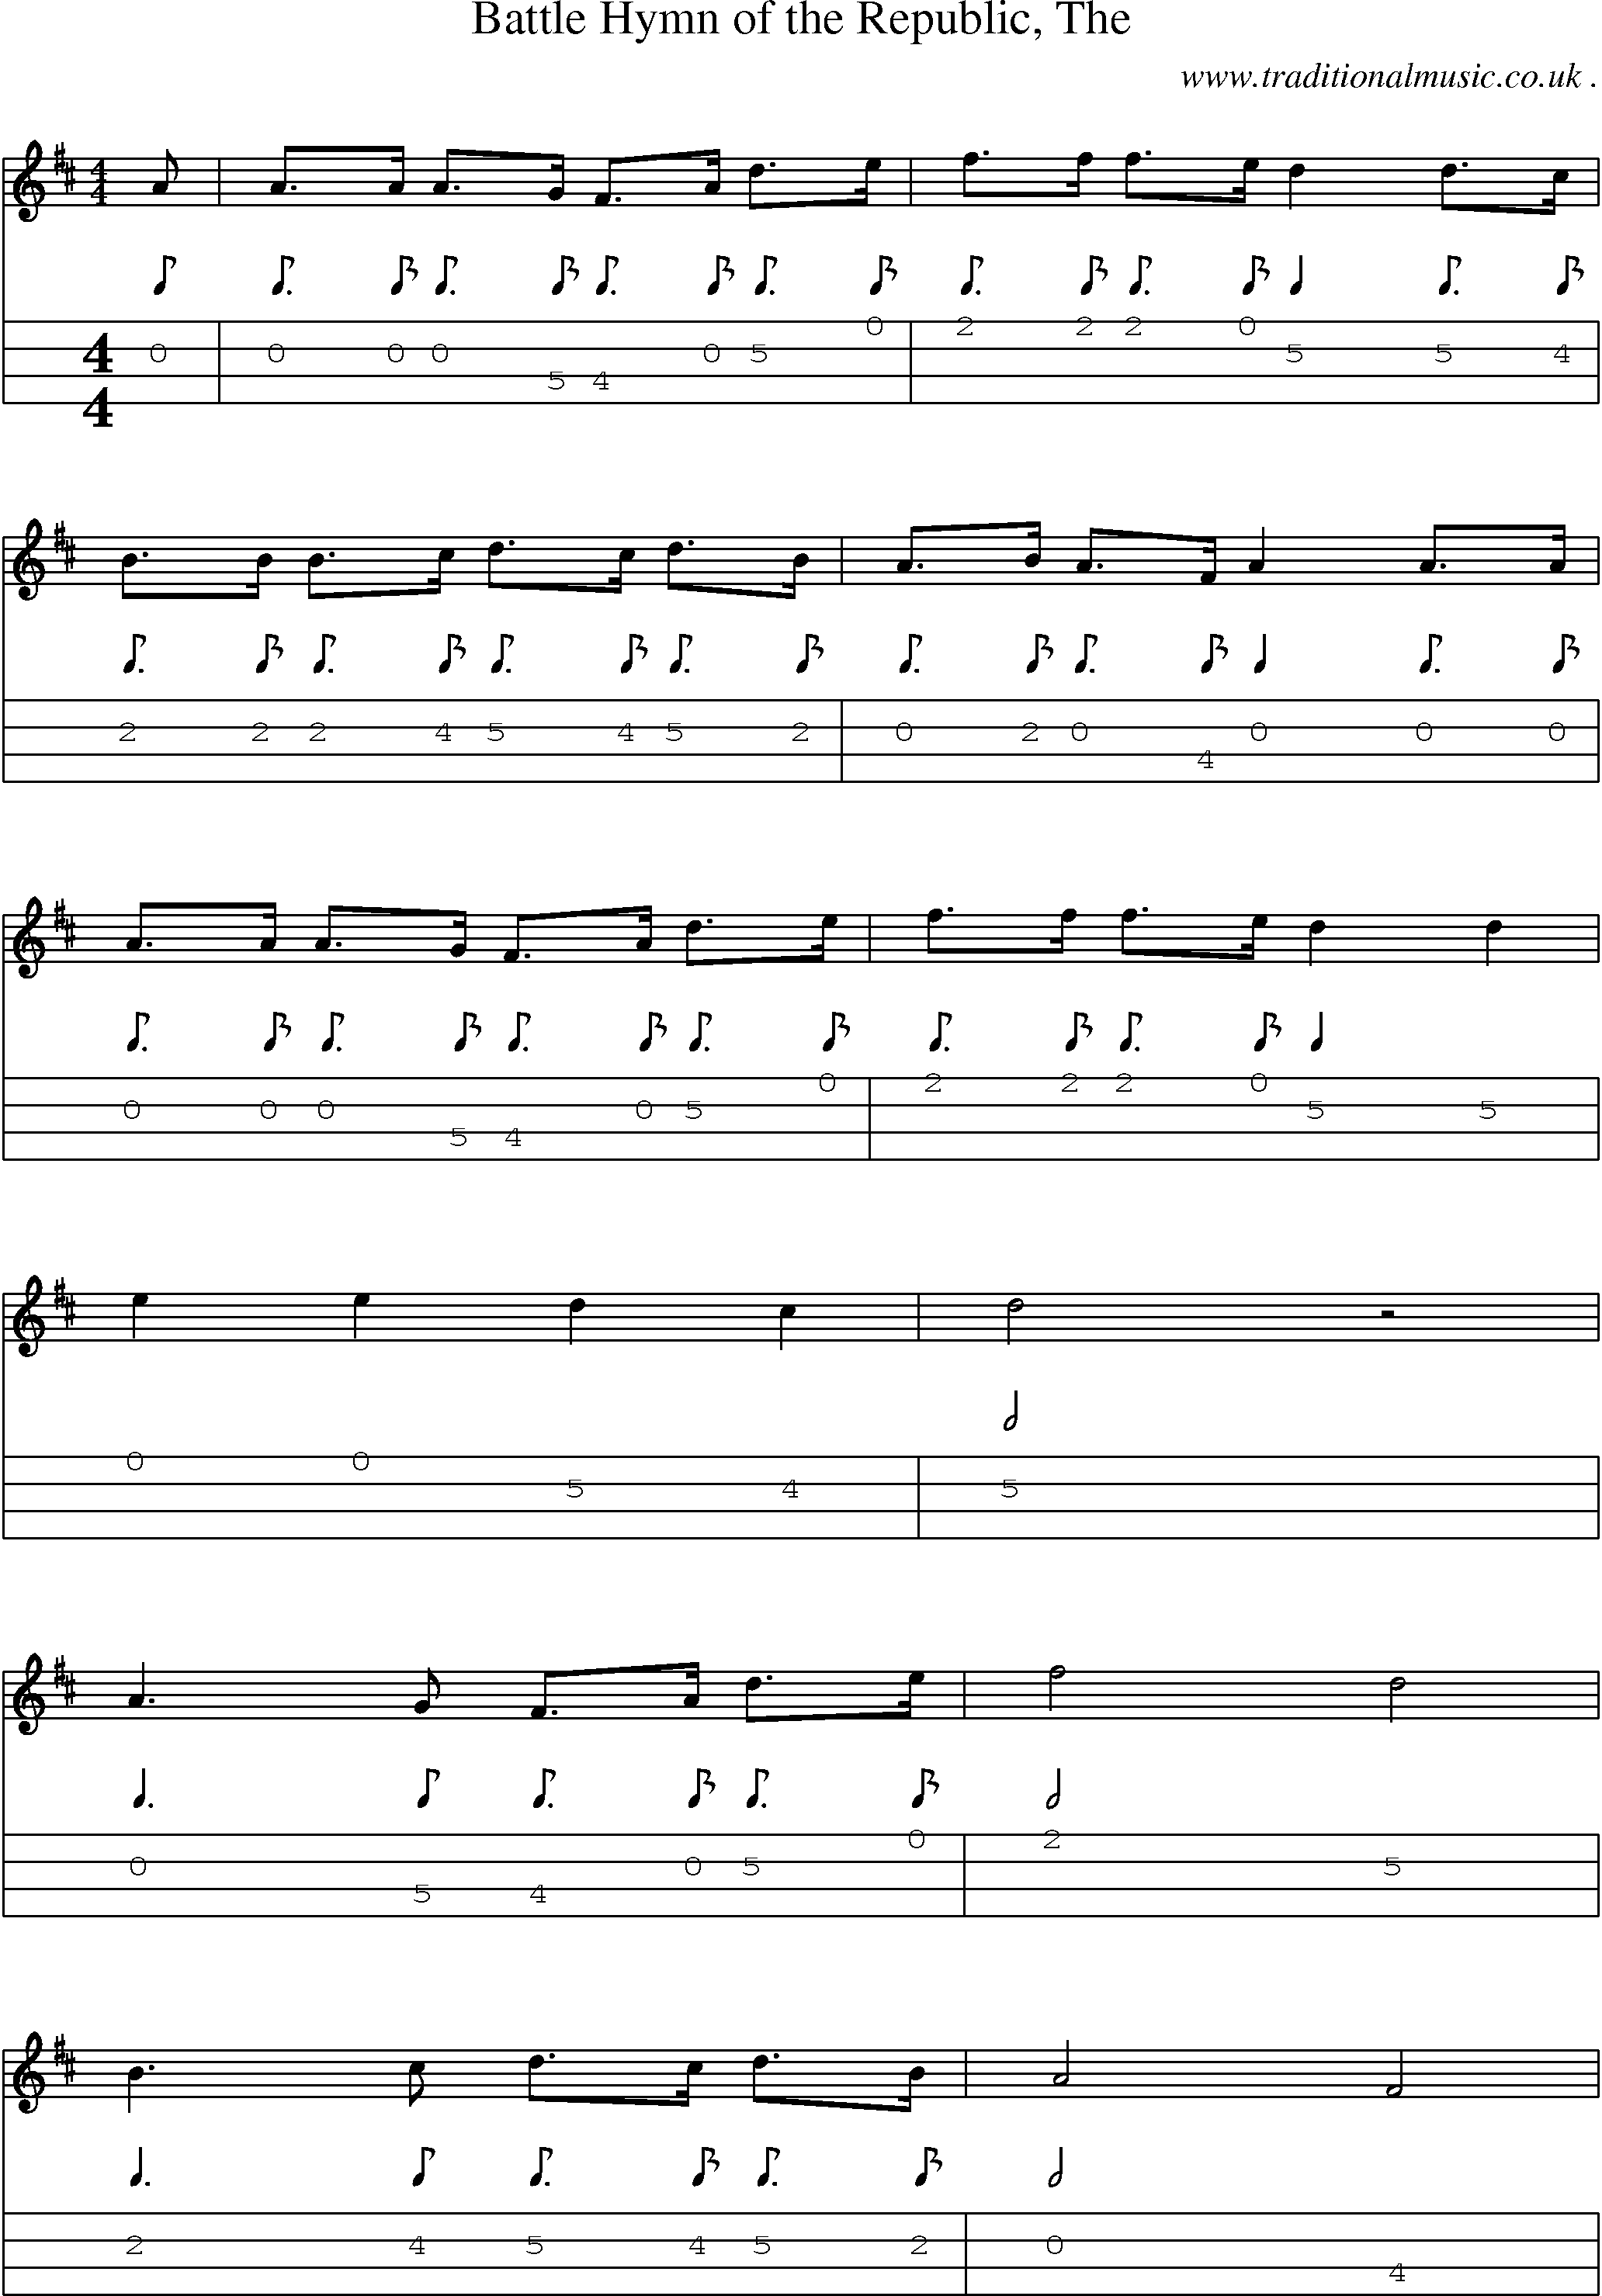 Music Score and Guitar Tabs for Battle Hymn Of The Republic The